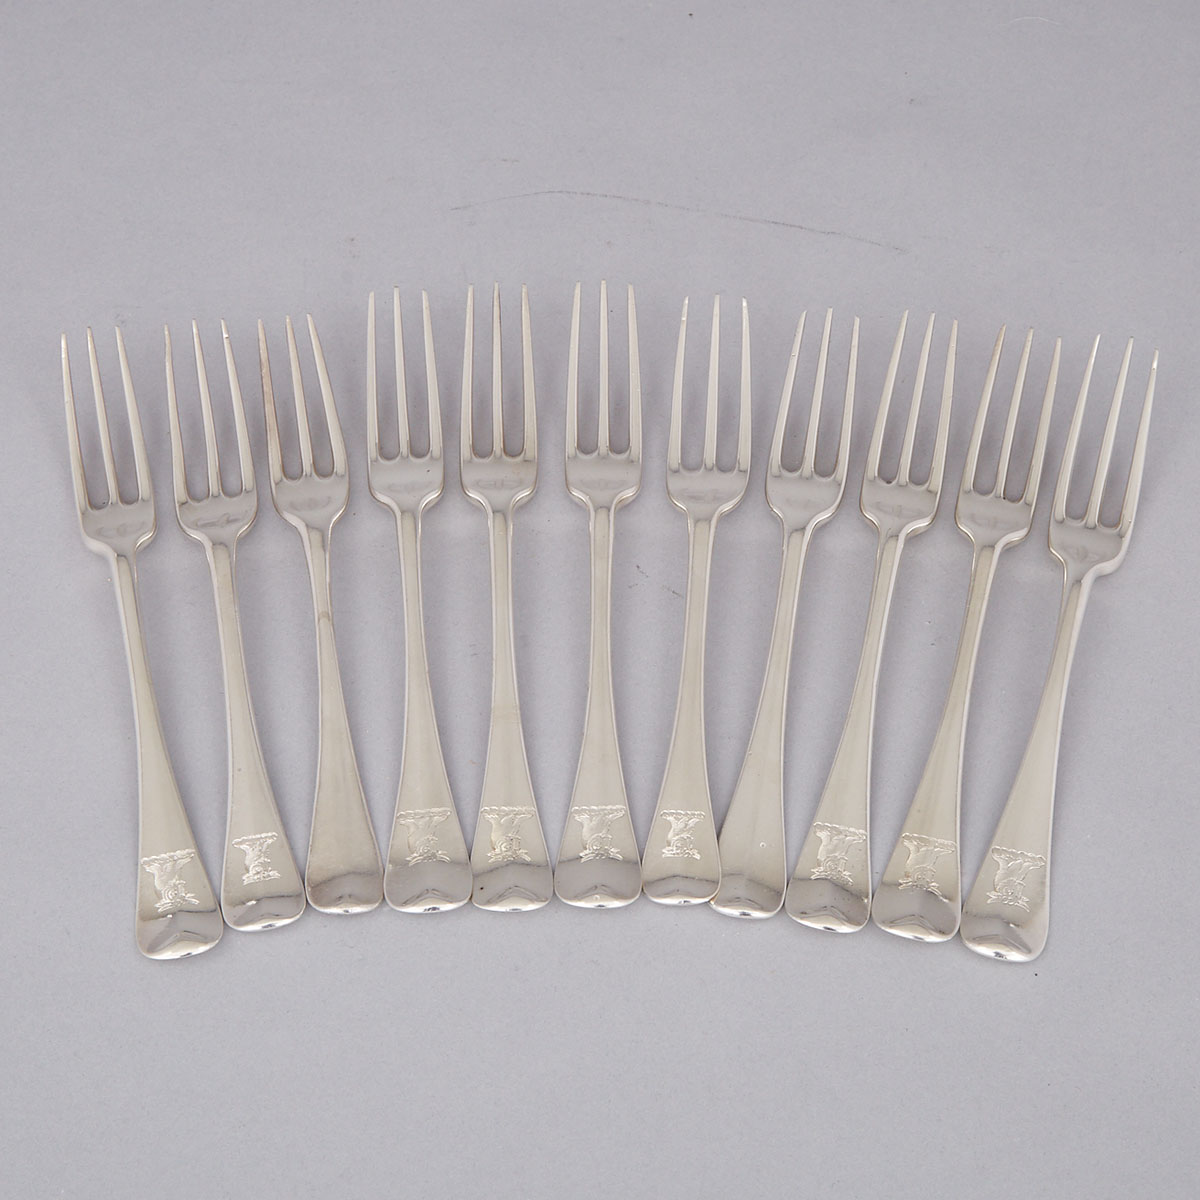 Eleven Early Georgian Silver Hanoverian Pattern Three-Pronged Table Forks, various makers, mainly London, 1713-34